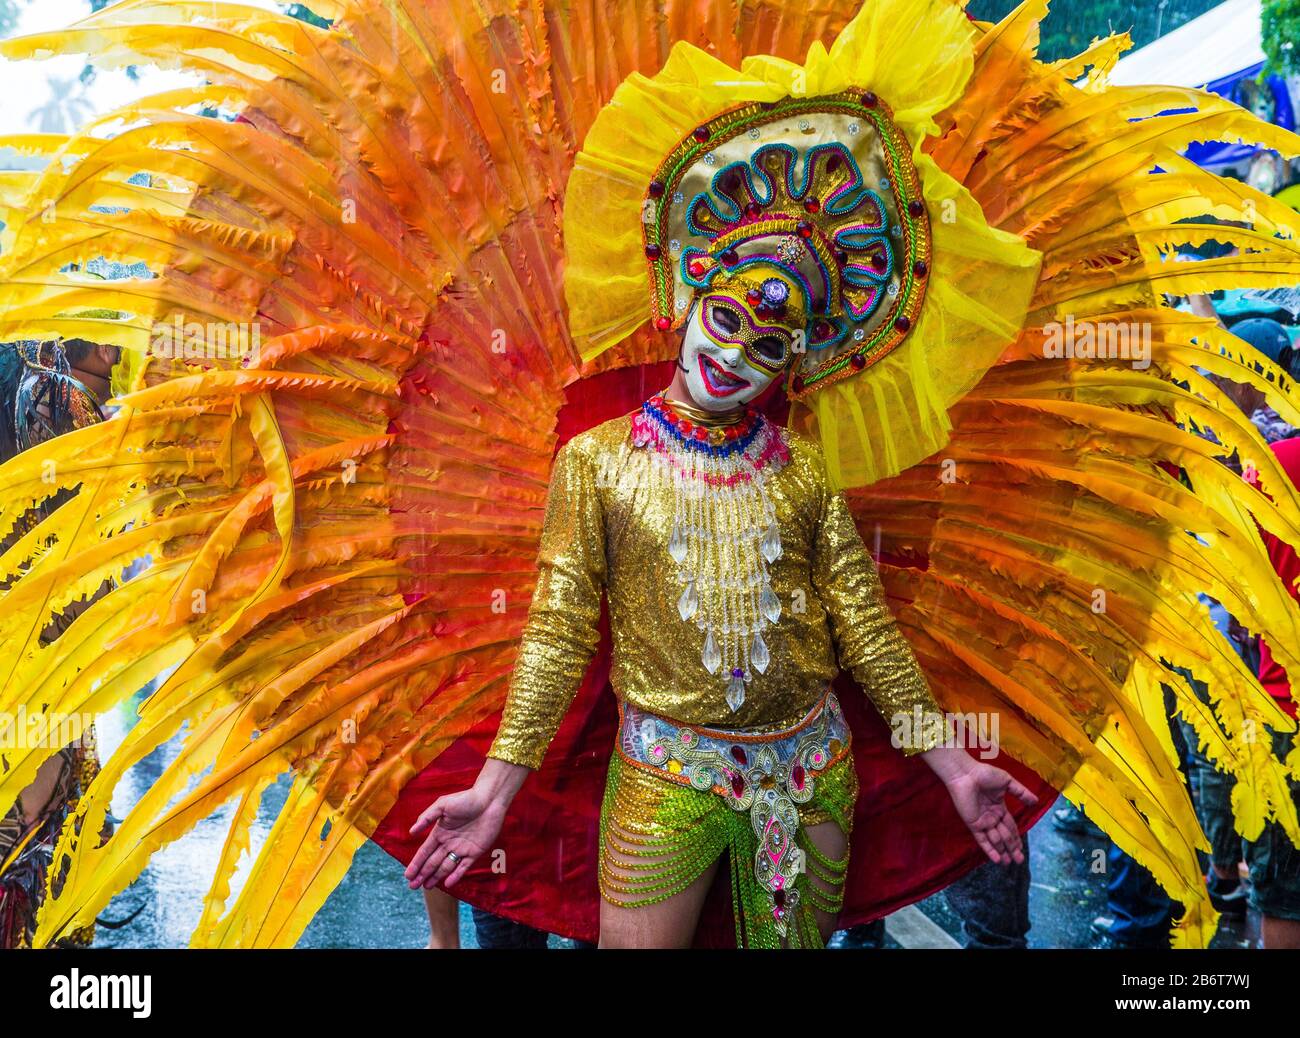 Participant in the Masskara Festival in Bacolod Philippines Stock Photo